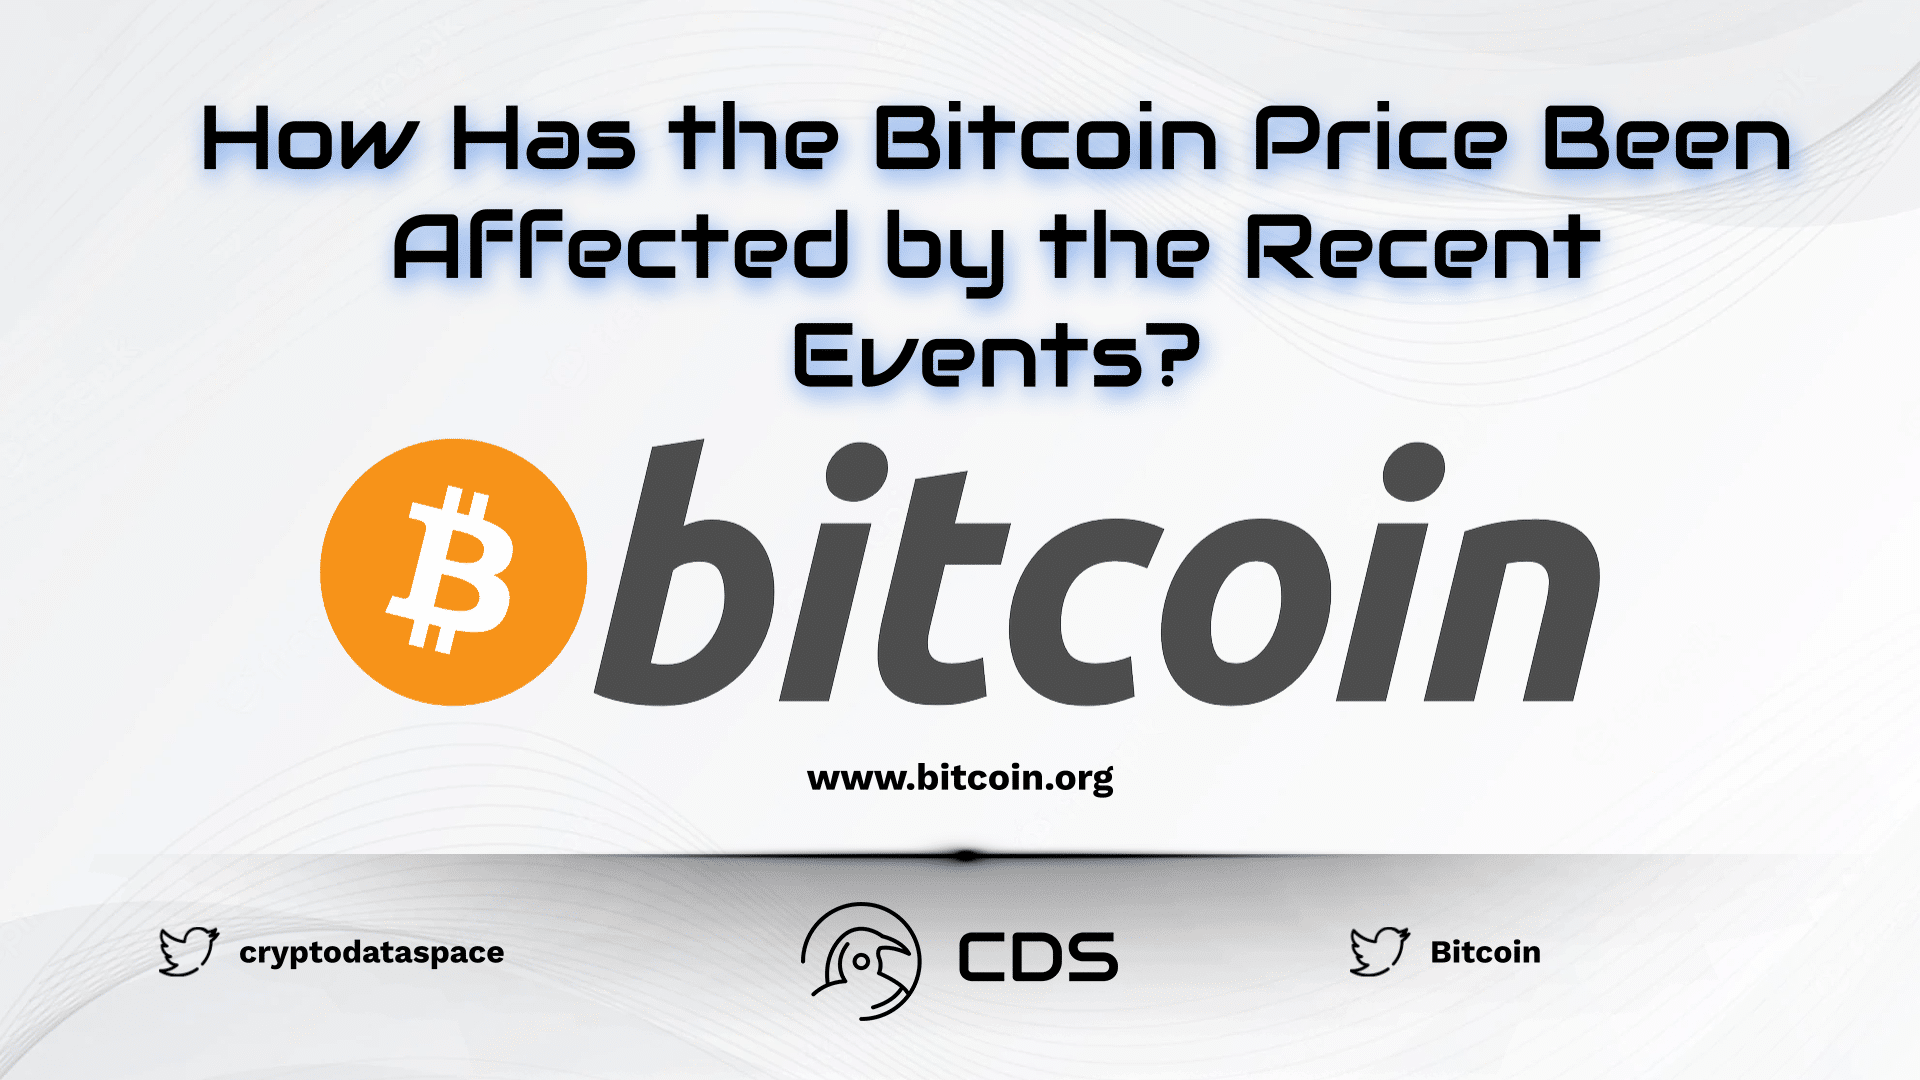 How Has the Bitcoin Price Been Affected by the Recent Events?